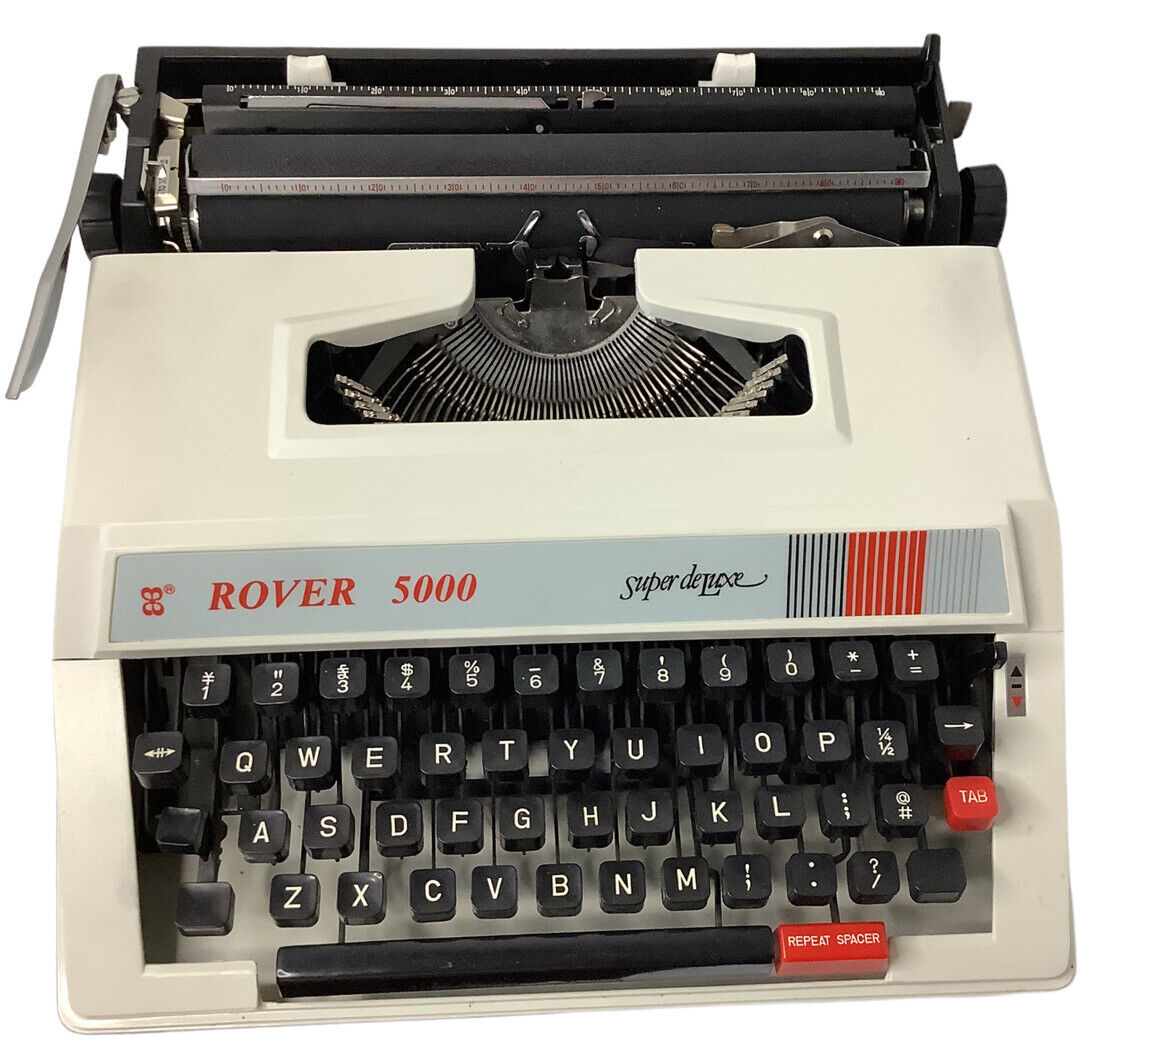 Vintage Portable Travel Typewriter Super Deluxe Rover 5000